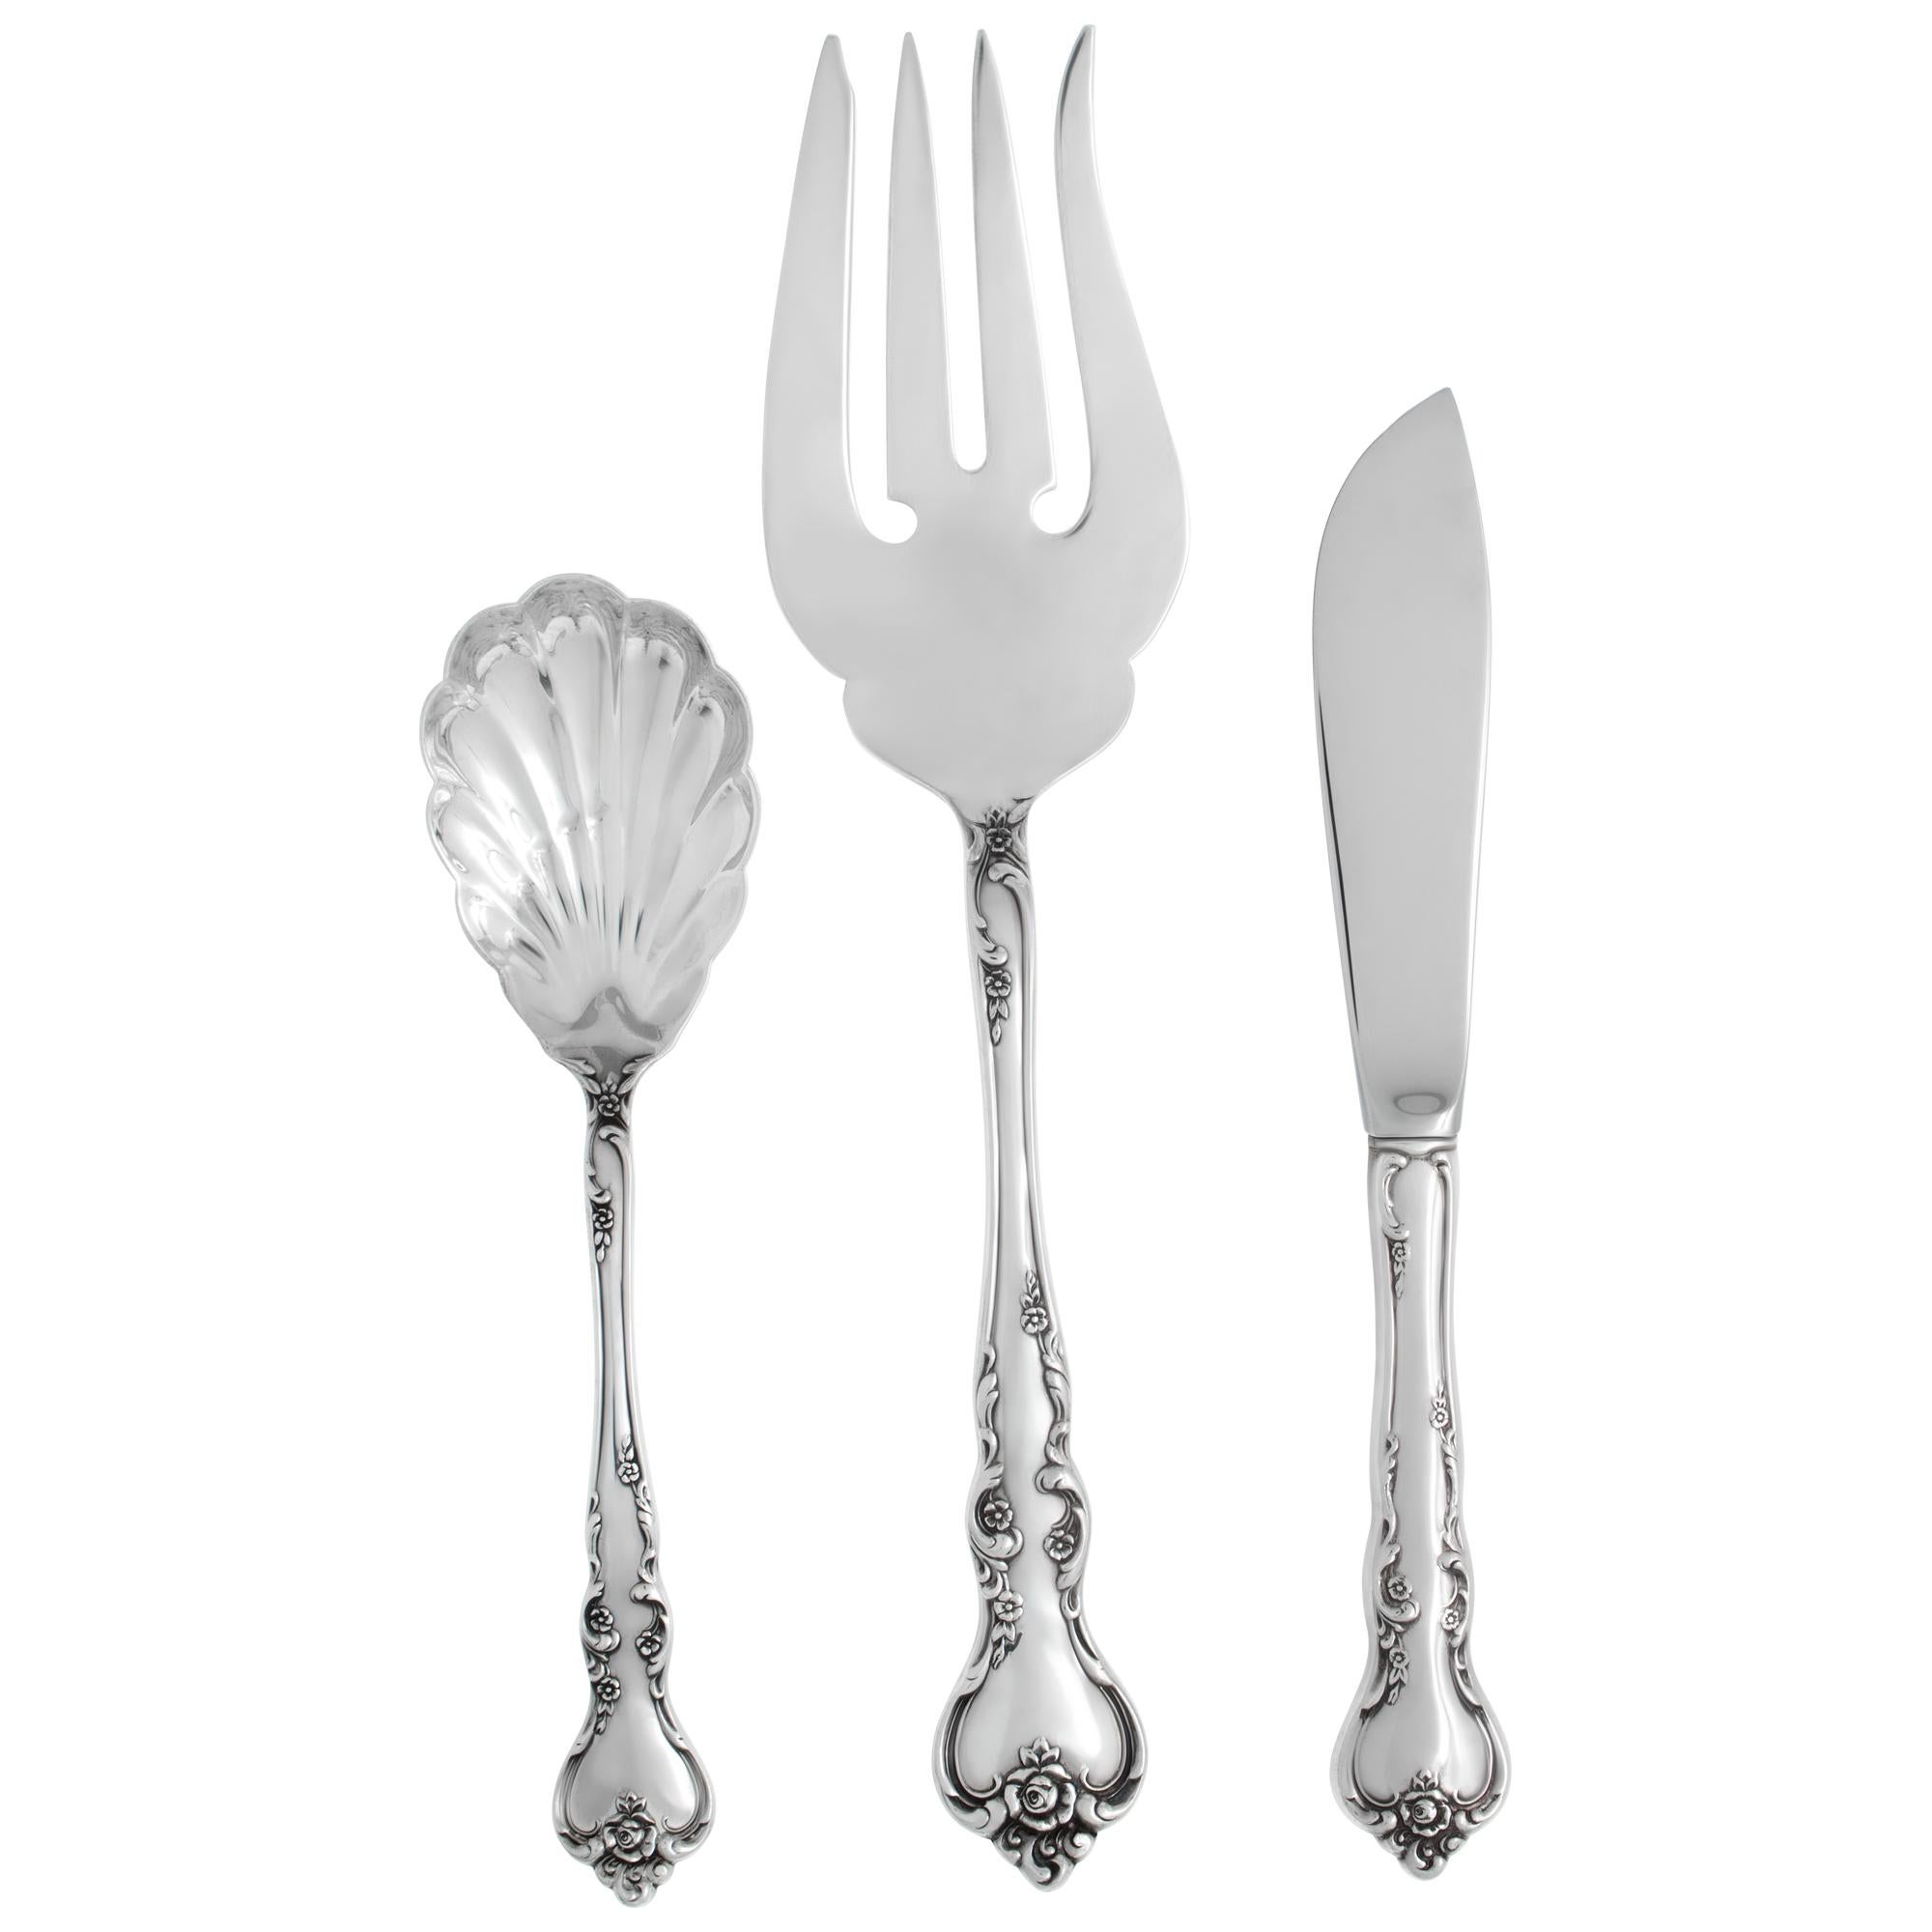 SAVANNAH sterling flatware set patented in 1962 by Reed & Barton. Approx. 85 ounces troy of .925 sterling silver (counting stainless steel blade pieces as 1 ounce troy each). 5 Place setting for 12 + 3 serving pieces. PLACE SETTING: 12 dinner knfe